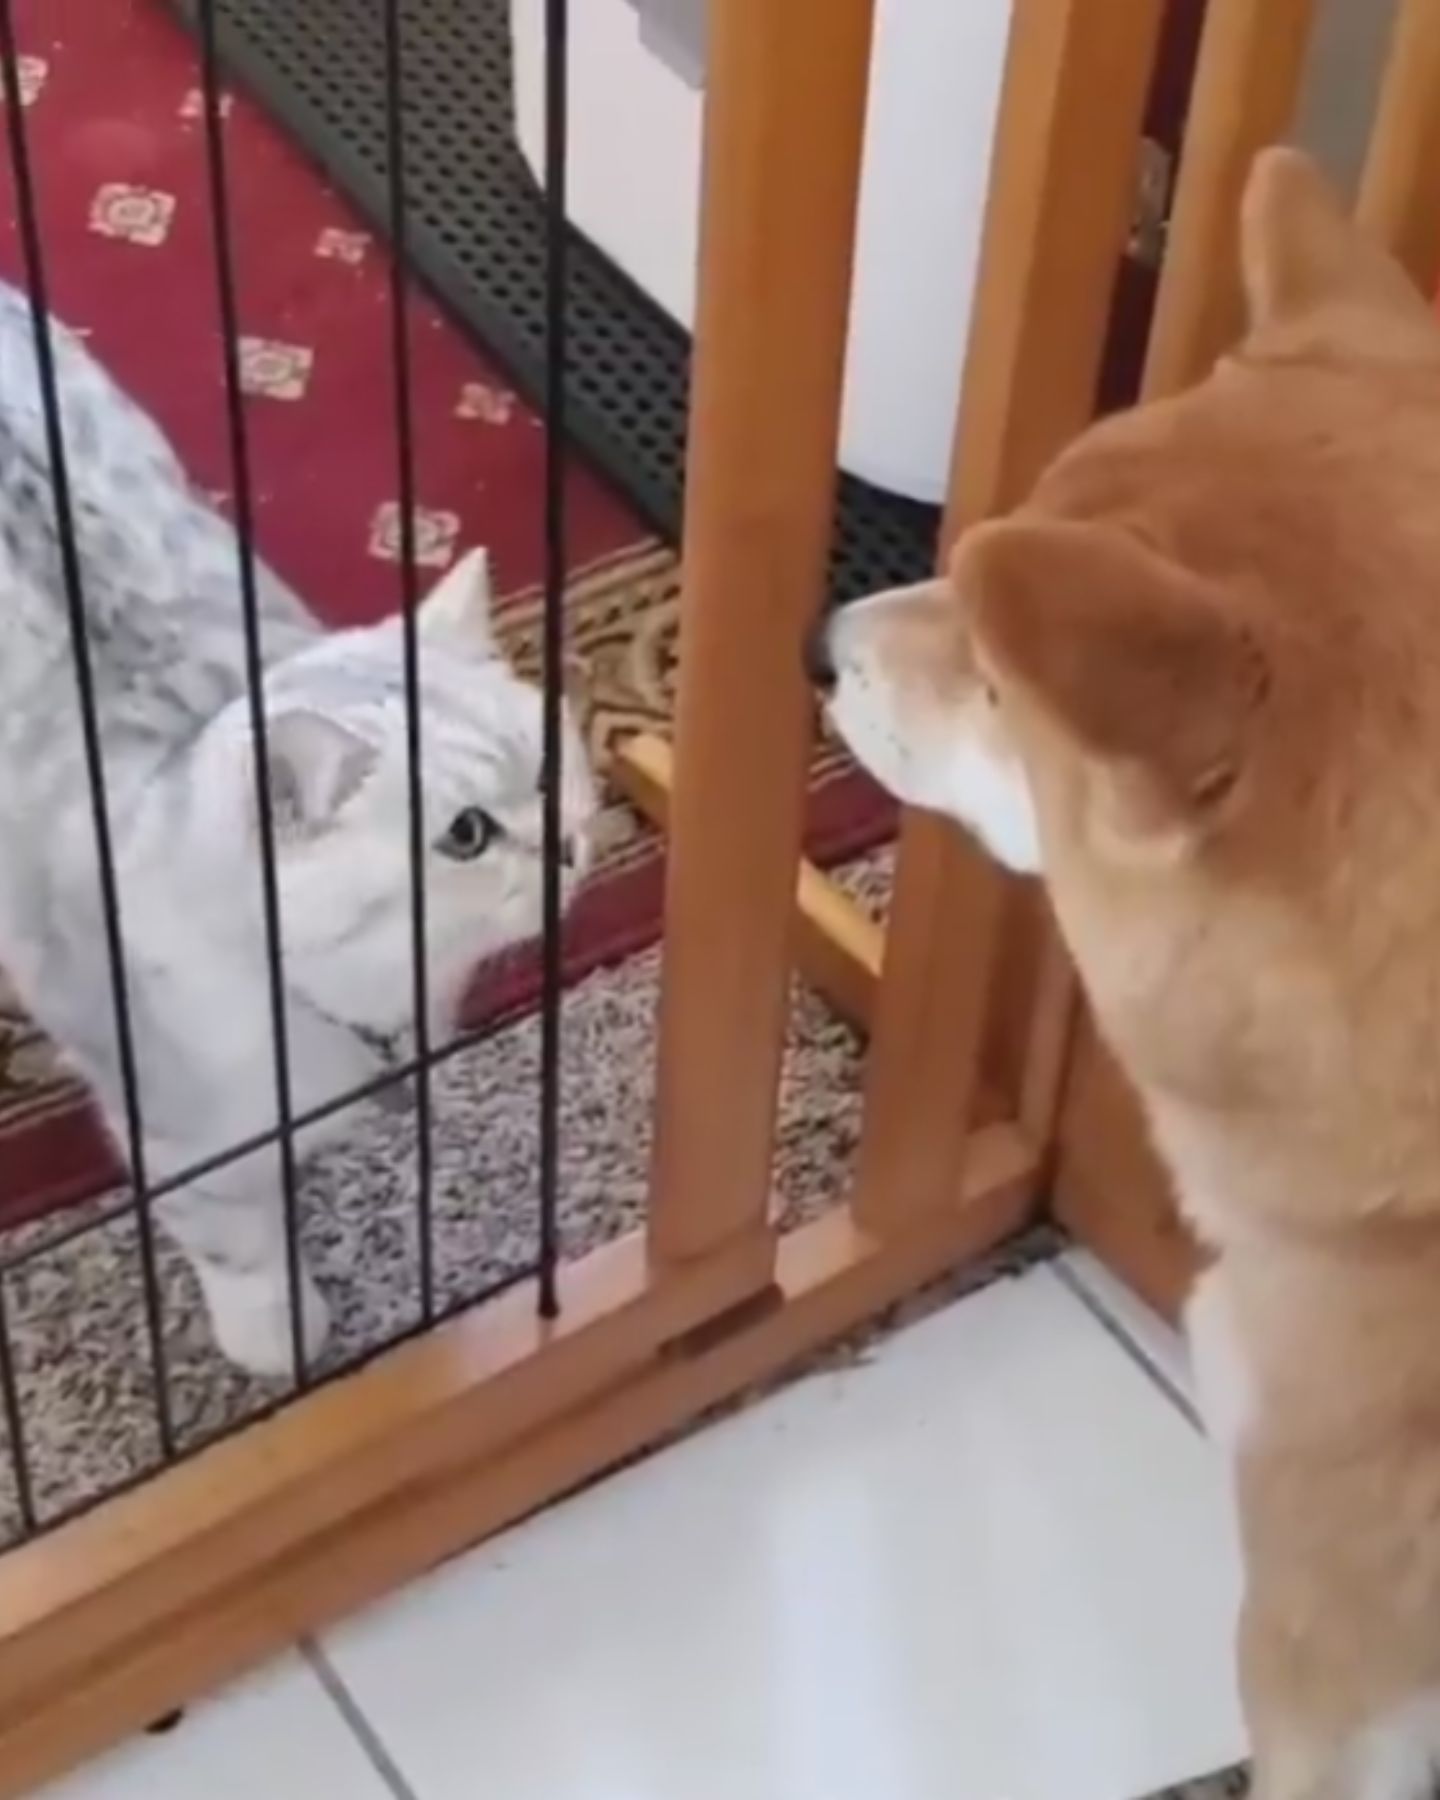 cat and dog friends